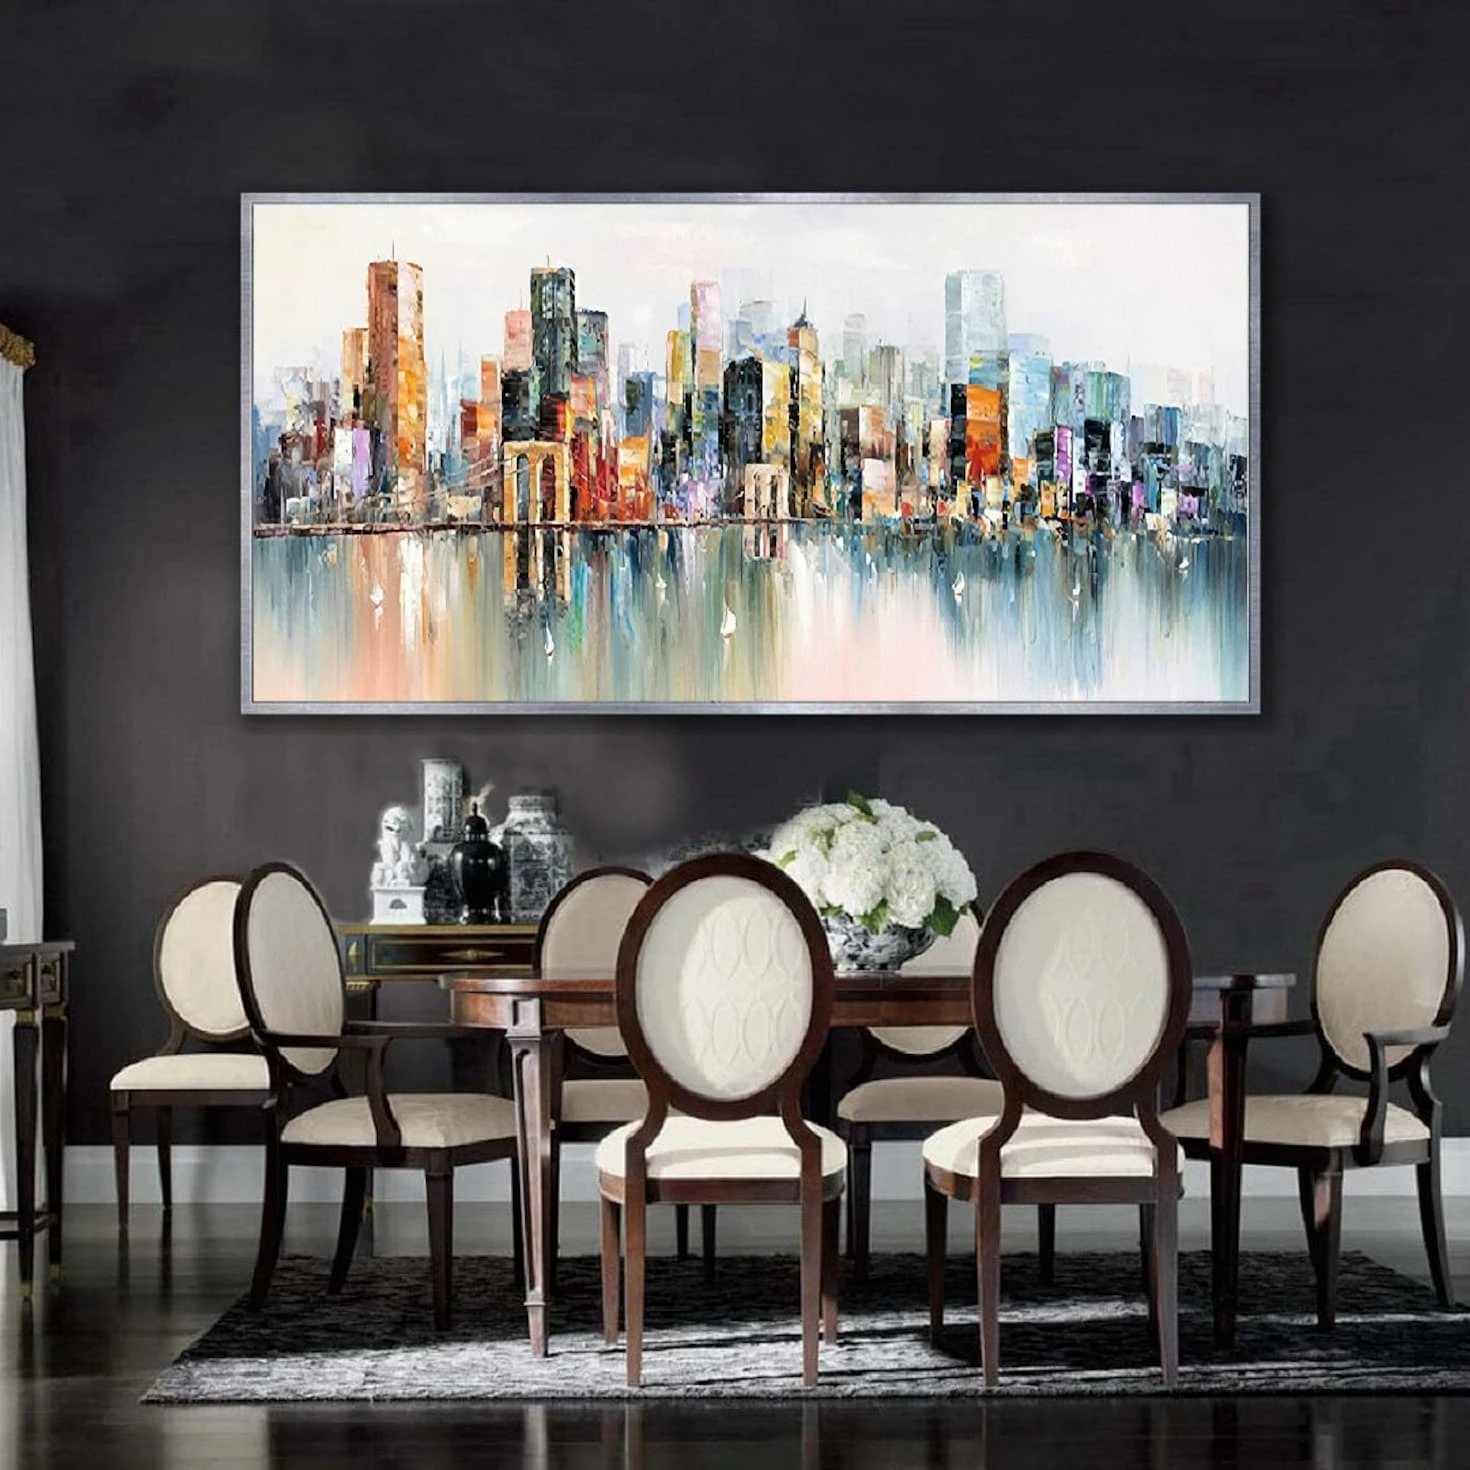 

Large New York City Landscape oil painting colorful painting 3D texture art Large urban Wall Art Original city art Hand-painted